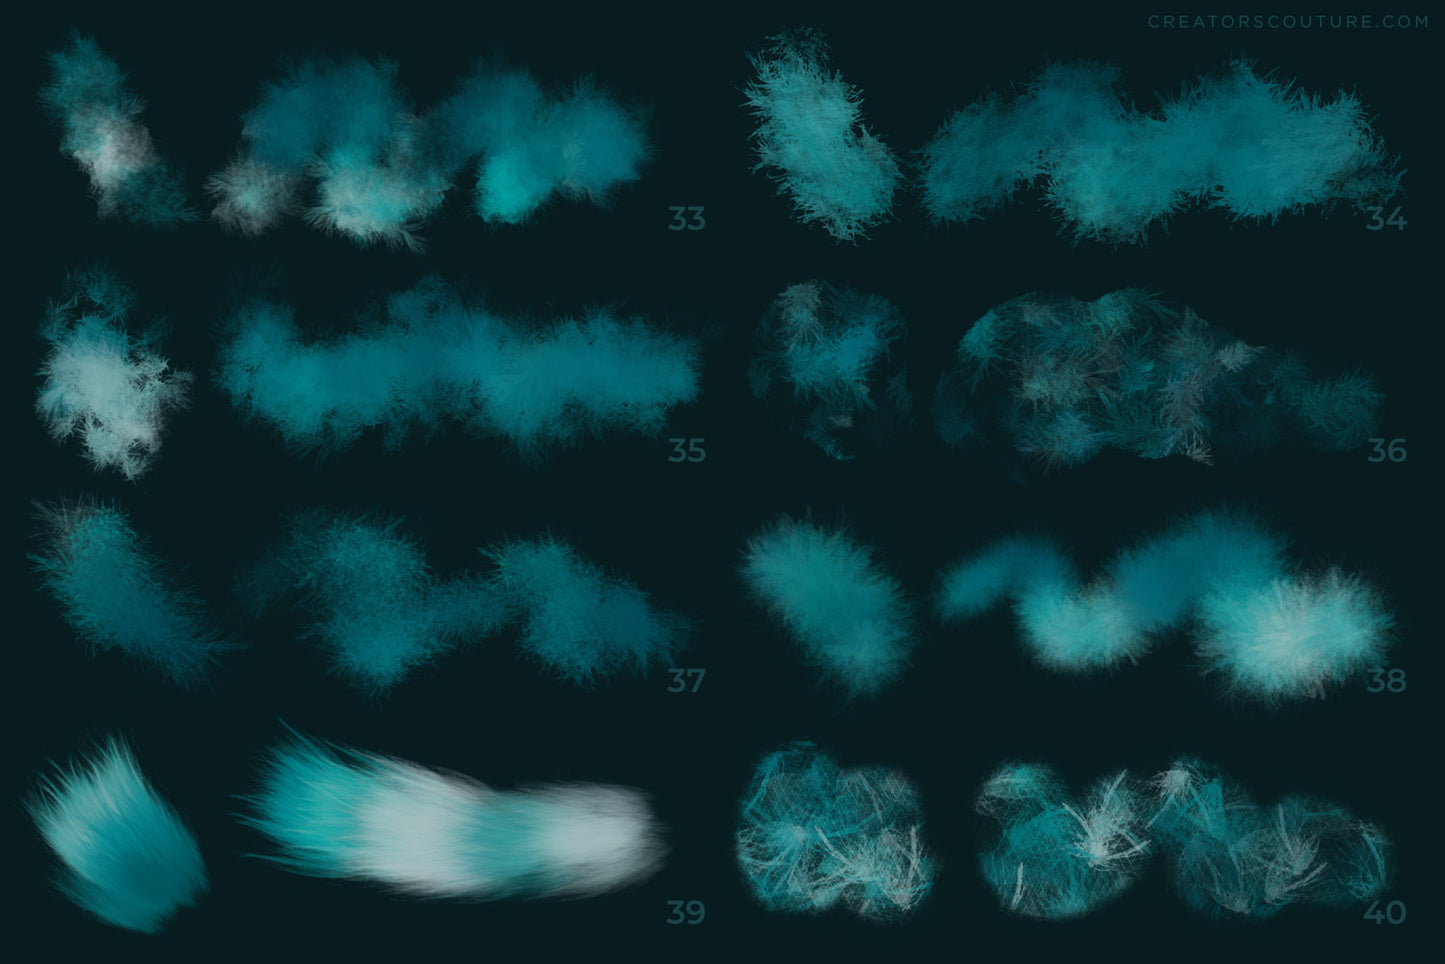 55 Painterly Artistic Photoshop Digital Brushes "Feather Couture Fantasies"